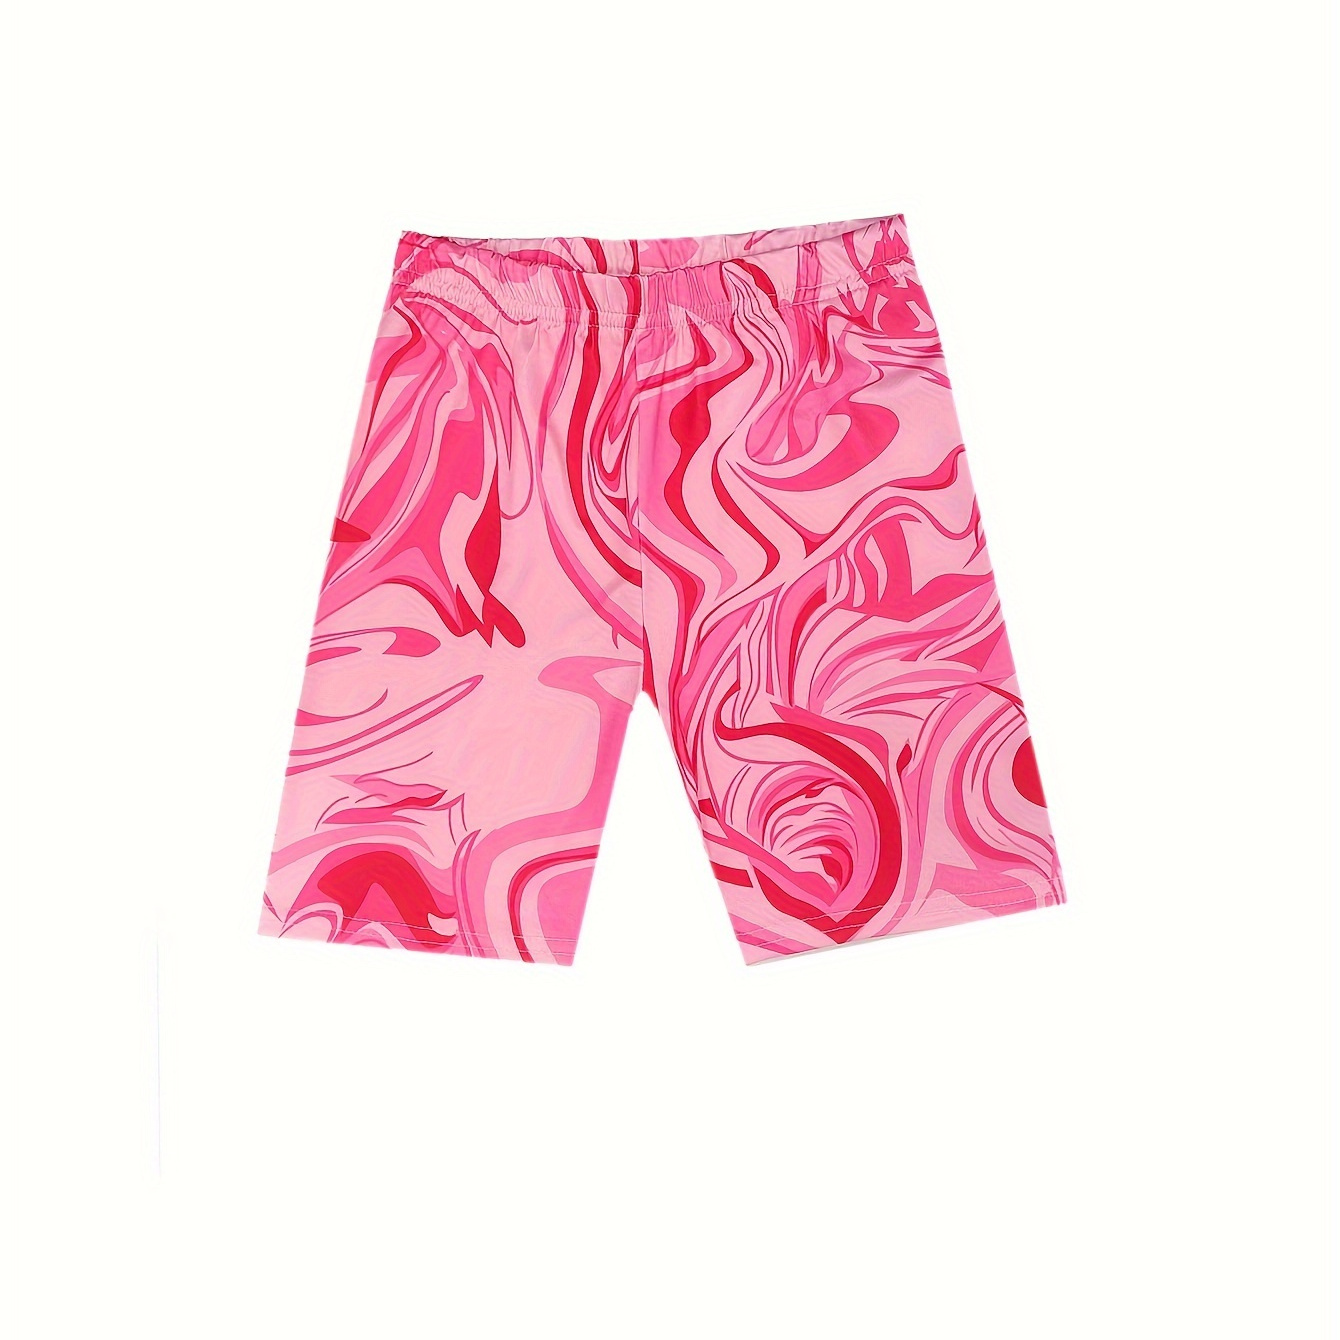 

Ripple Pattern Sport Shorts For Girls, Comfy Quick-drying Riding Set Breathable Versatile Outfit Summer Gift